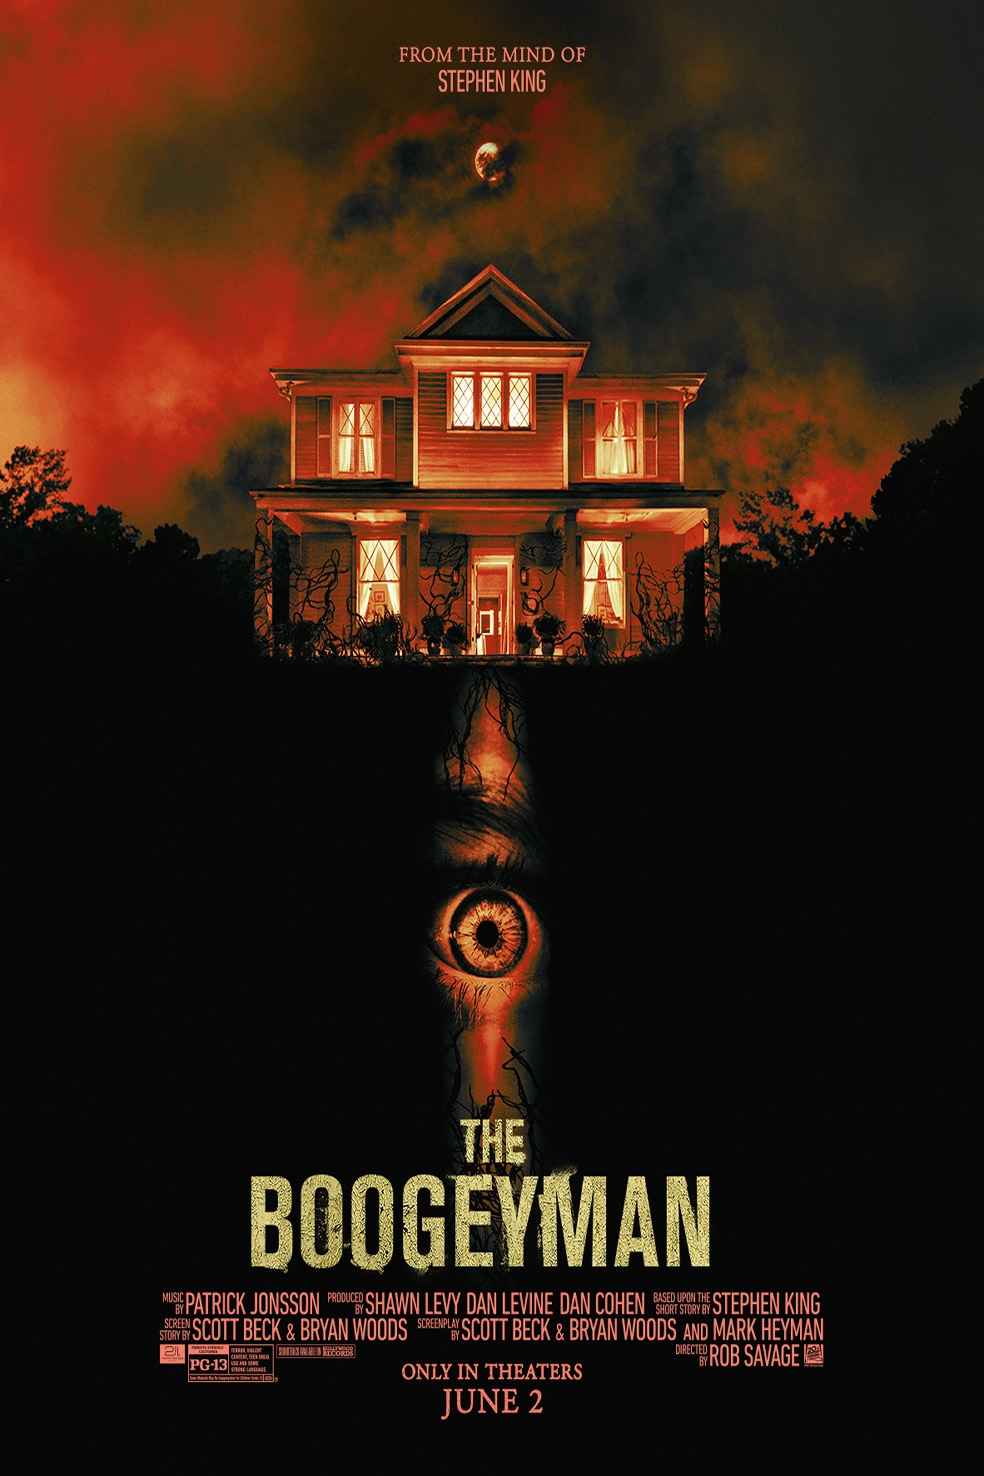 Poster for Boogeyman, The                                                             